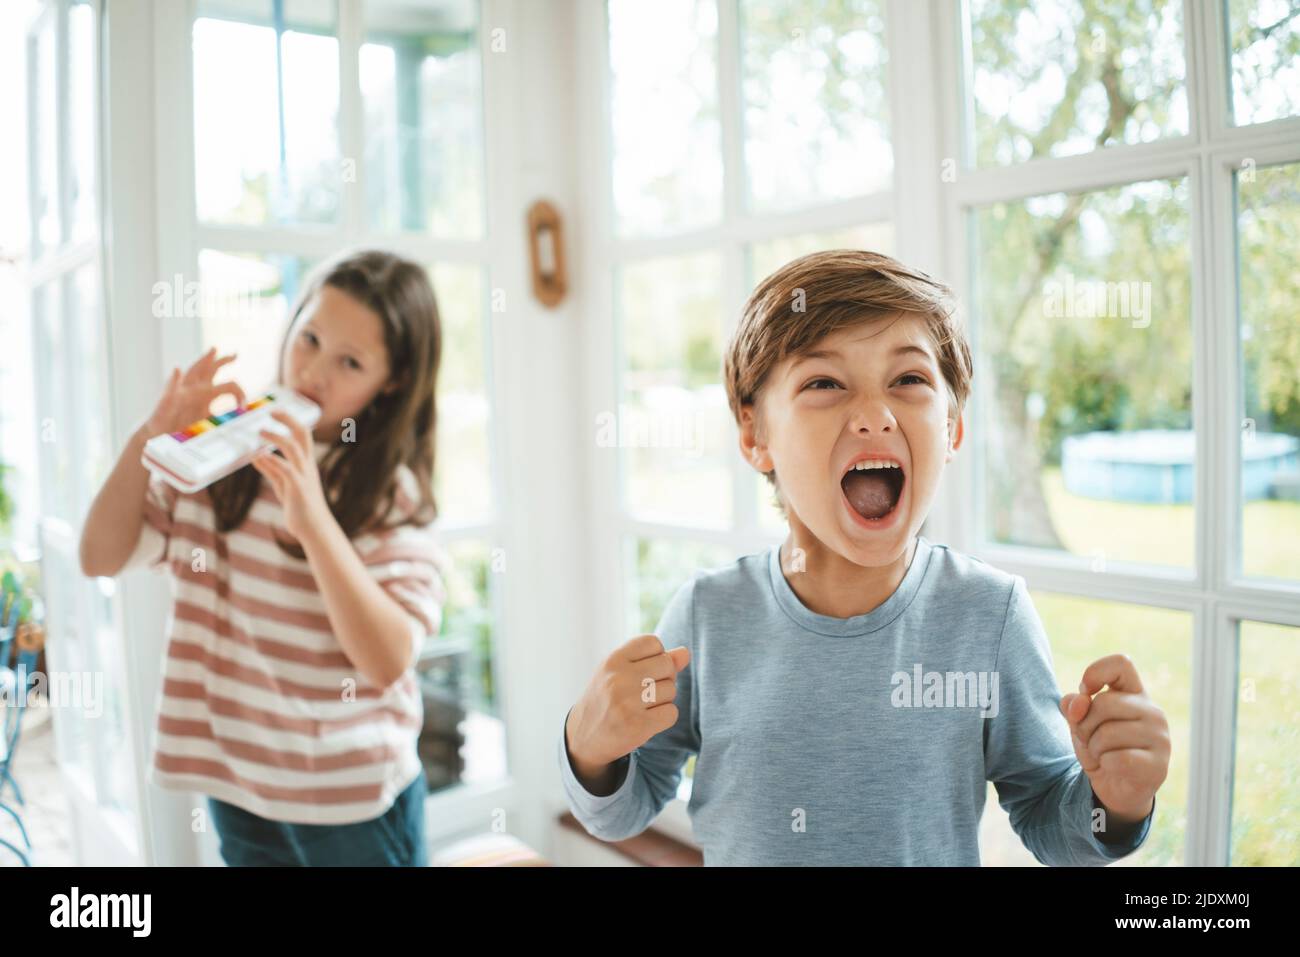 Boy screaming standing in front of sister playing musical instrument Stock Photo